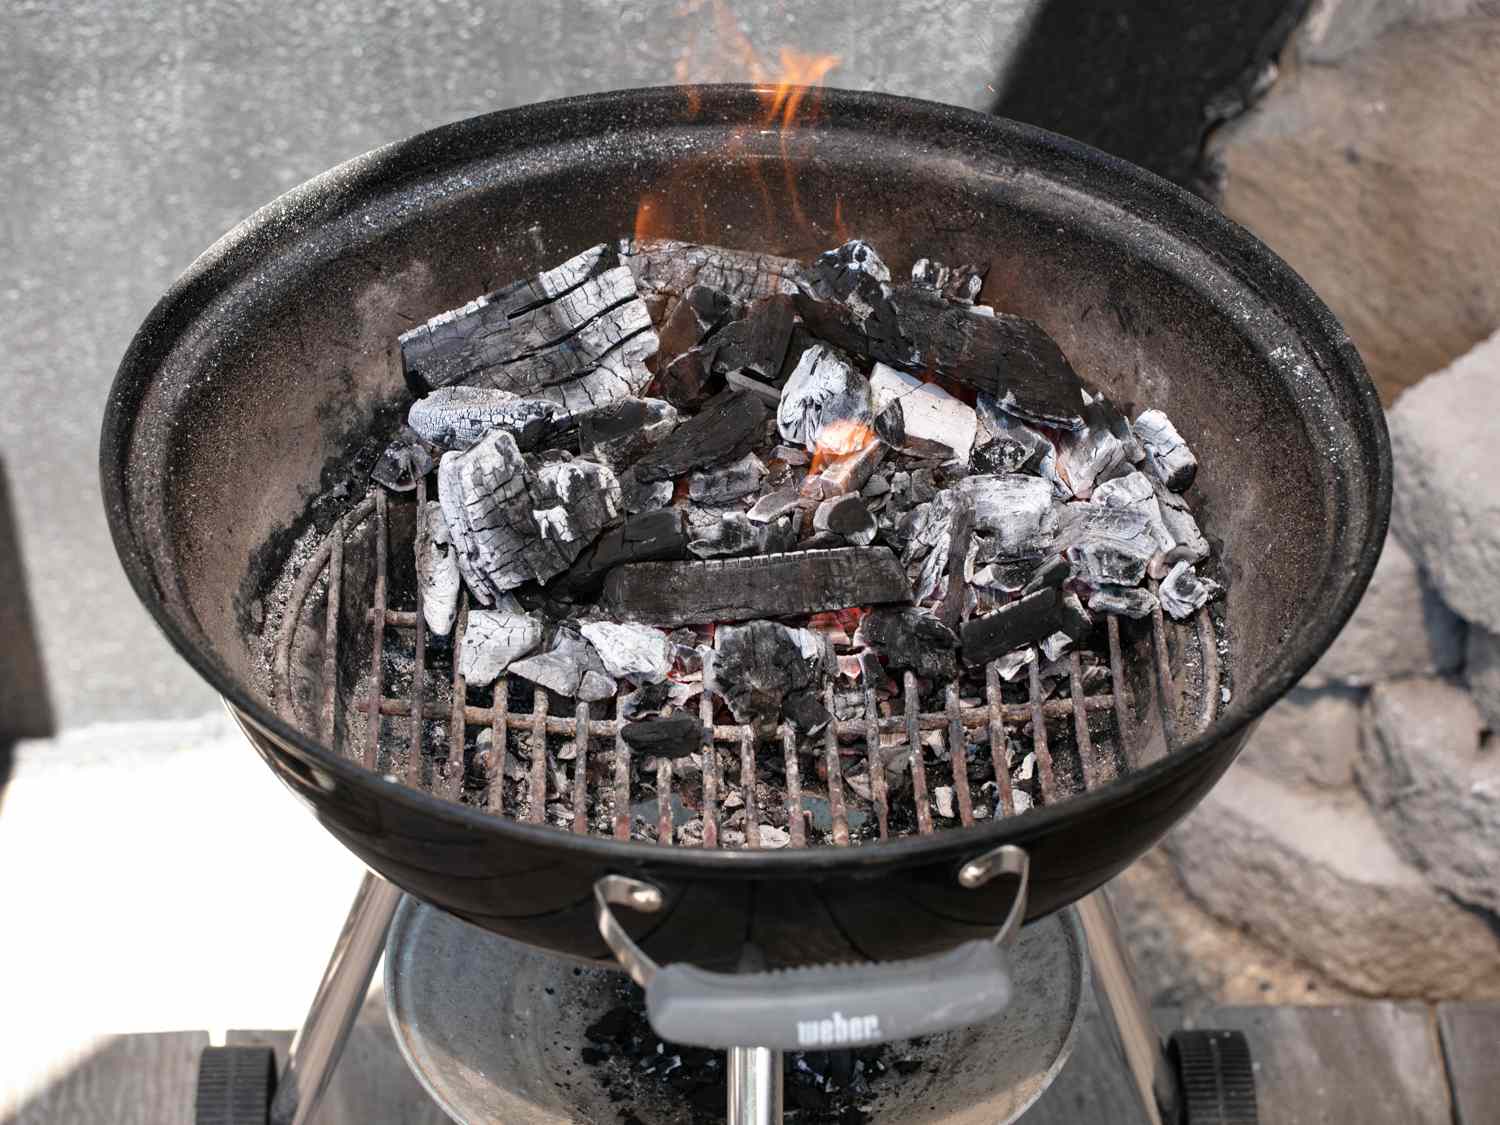 Charcoal added to kettle of grill for making elotes